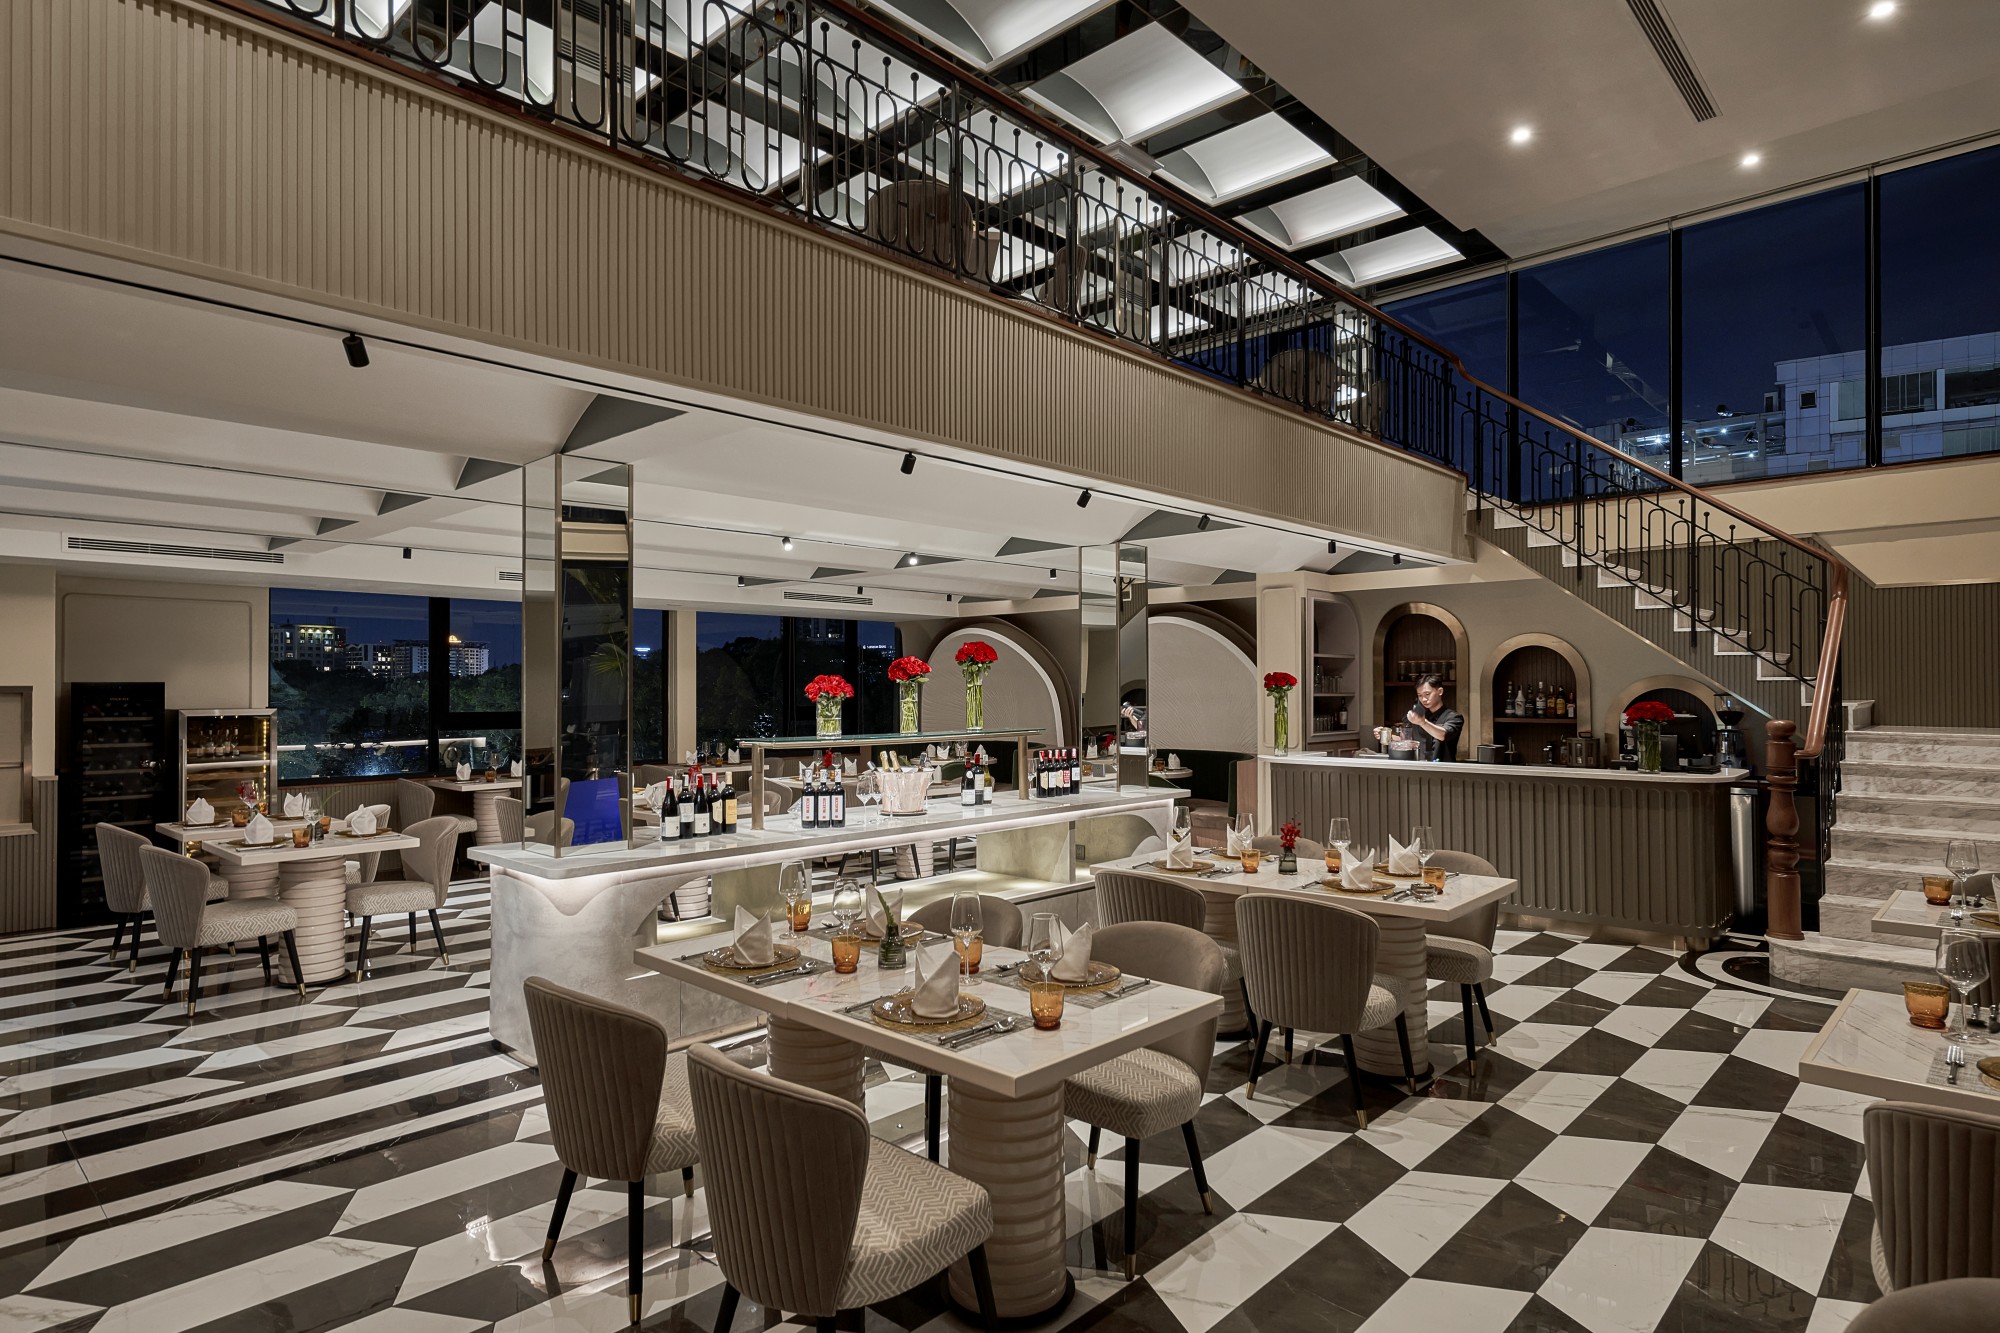 Cloud Nine Restaurant guarantees a special experience that goes beyond the usual dining